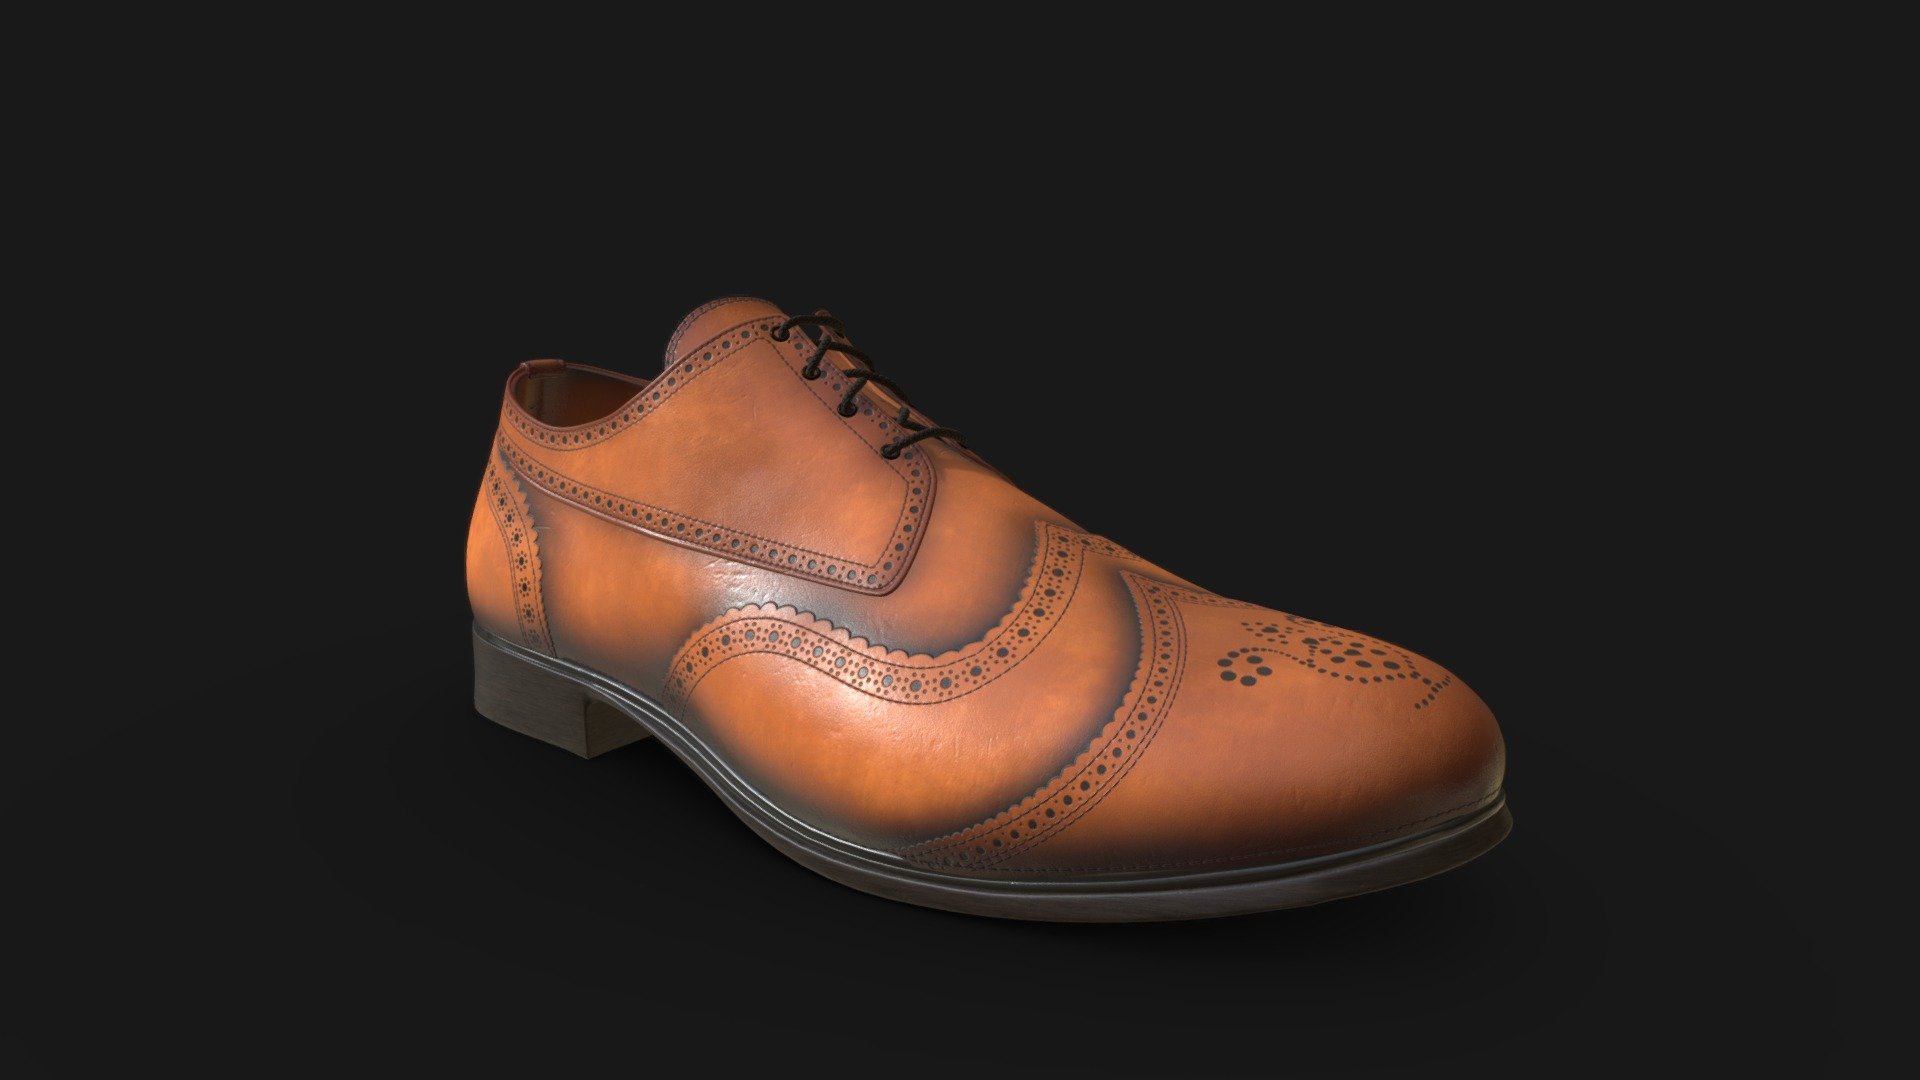 Oxford Brogue shoe textured with Substance 3D Painter using the new 3D Paths feature in 9.0.0 - awesome feature, makes things like creating patterns and stitches so much quicker!
Shoe model was taken from Substance 3D assets site and reshaped in Maya slightly to fit the Oxford look better. 

Asset was created for the Substance 3D Painter 9.0.0 release video.

See the release video here: https://youtu.be/Ro5dADu3vpM - Oxford Brogue Shoe - 3D model by ebisset 3d model